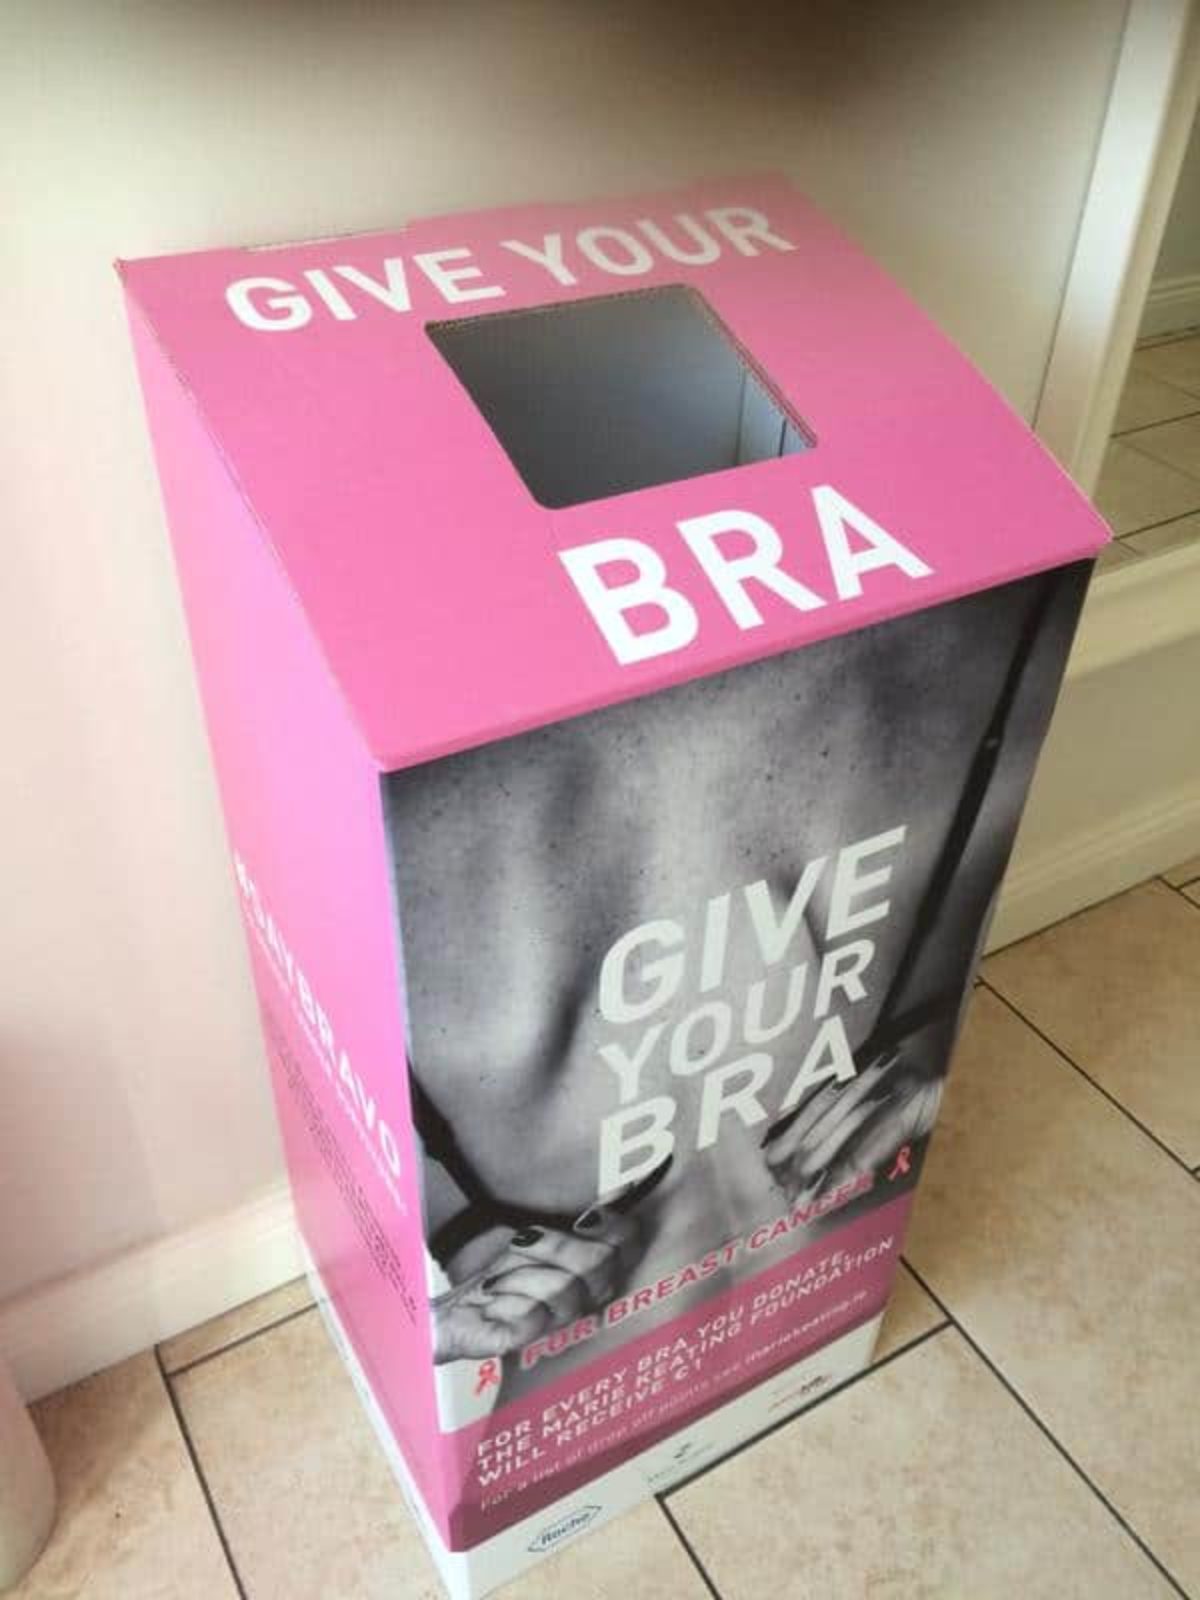 Donate your bras for a good cause